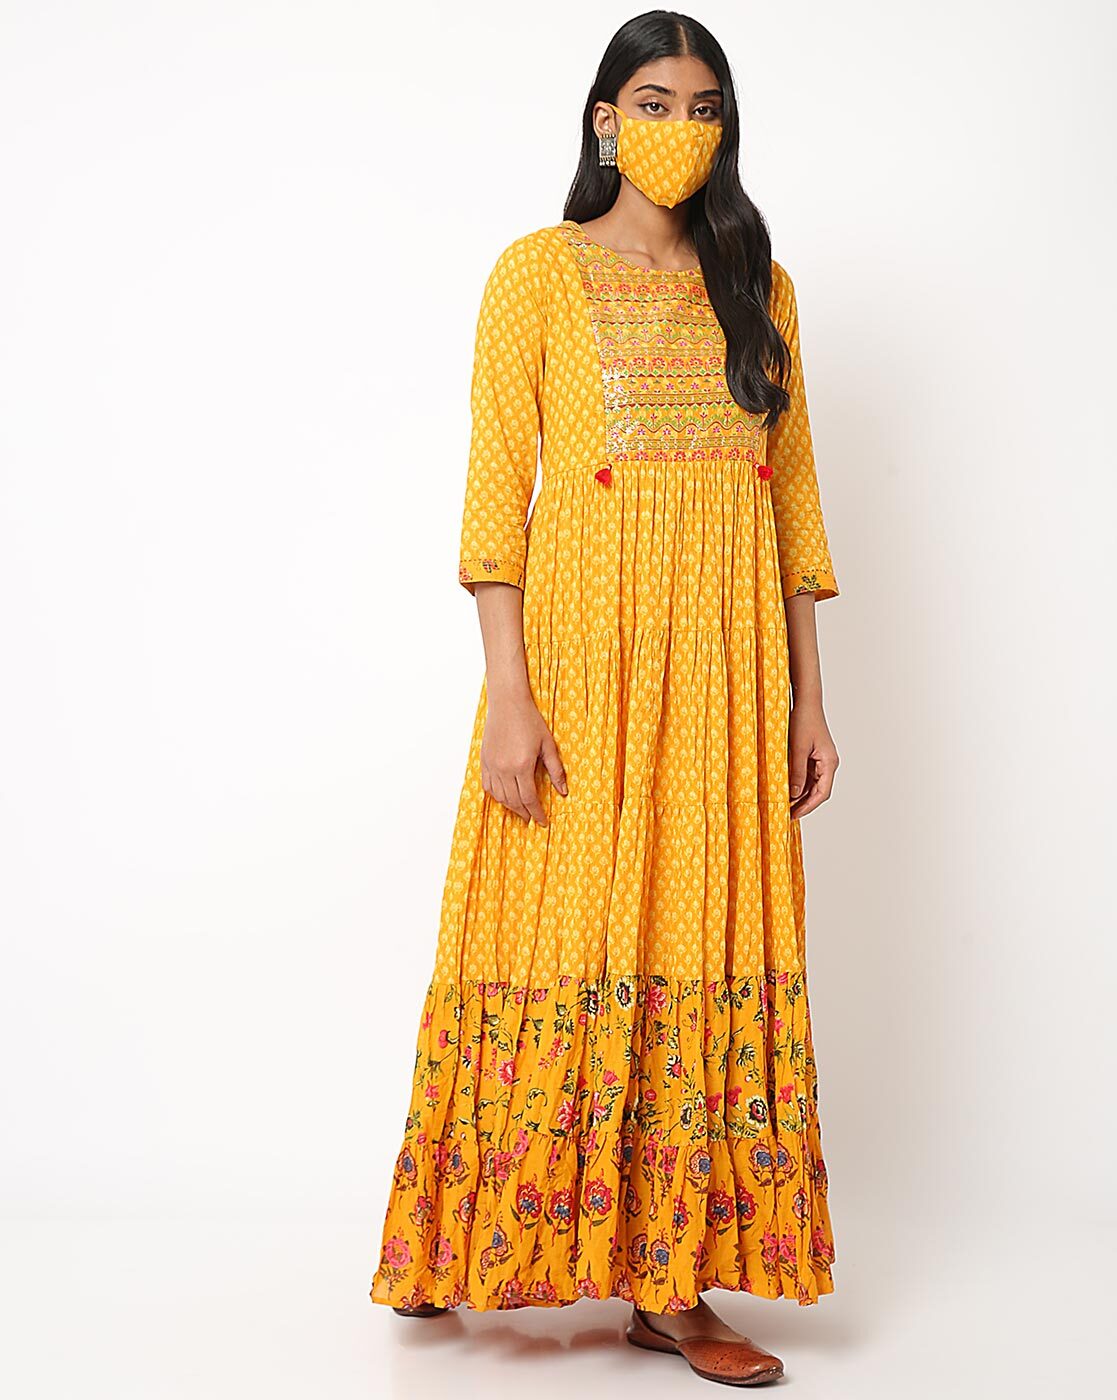 Buy Red Cotton Fusion Dress (Dress, Mask) for INR1999.50 | Biba India